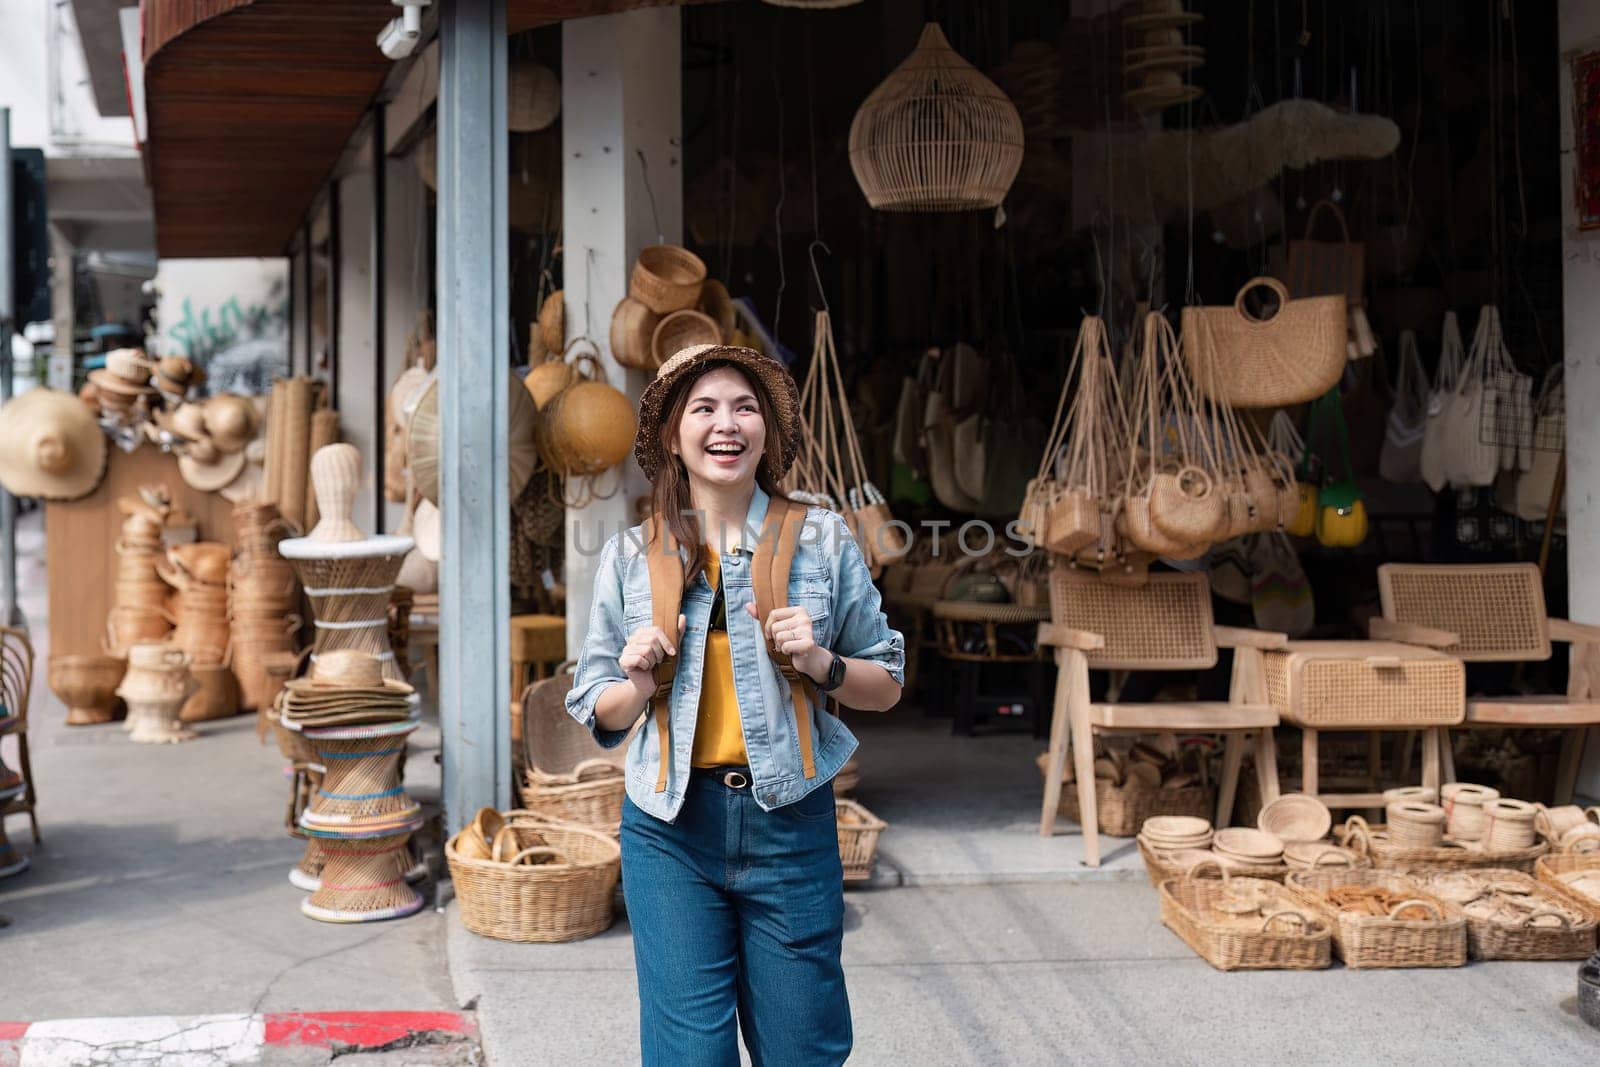 Joyful Traveler Exploring Local Market with Handcrafted Goods in Vibrant Urban Setting by itchaznong